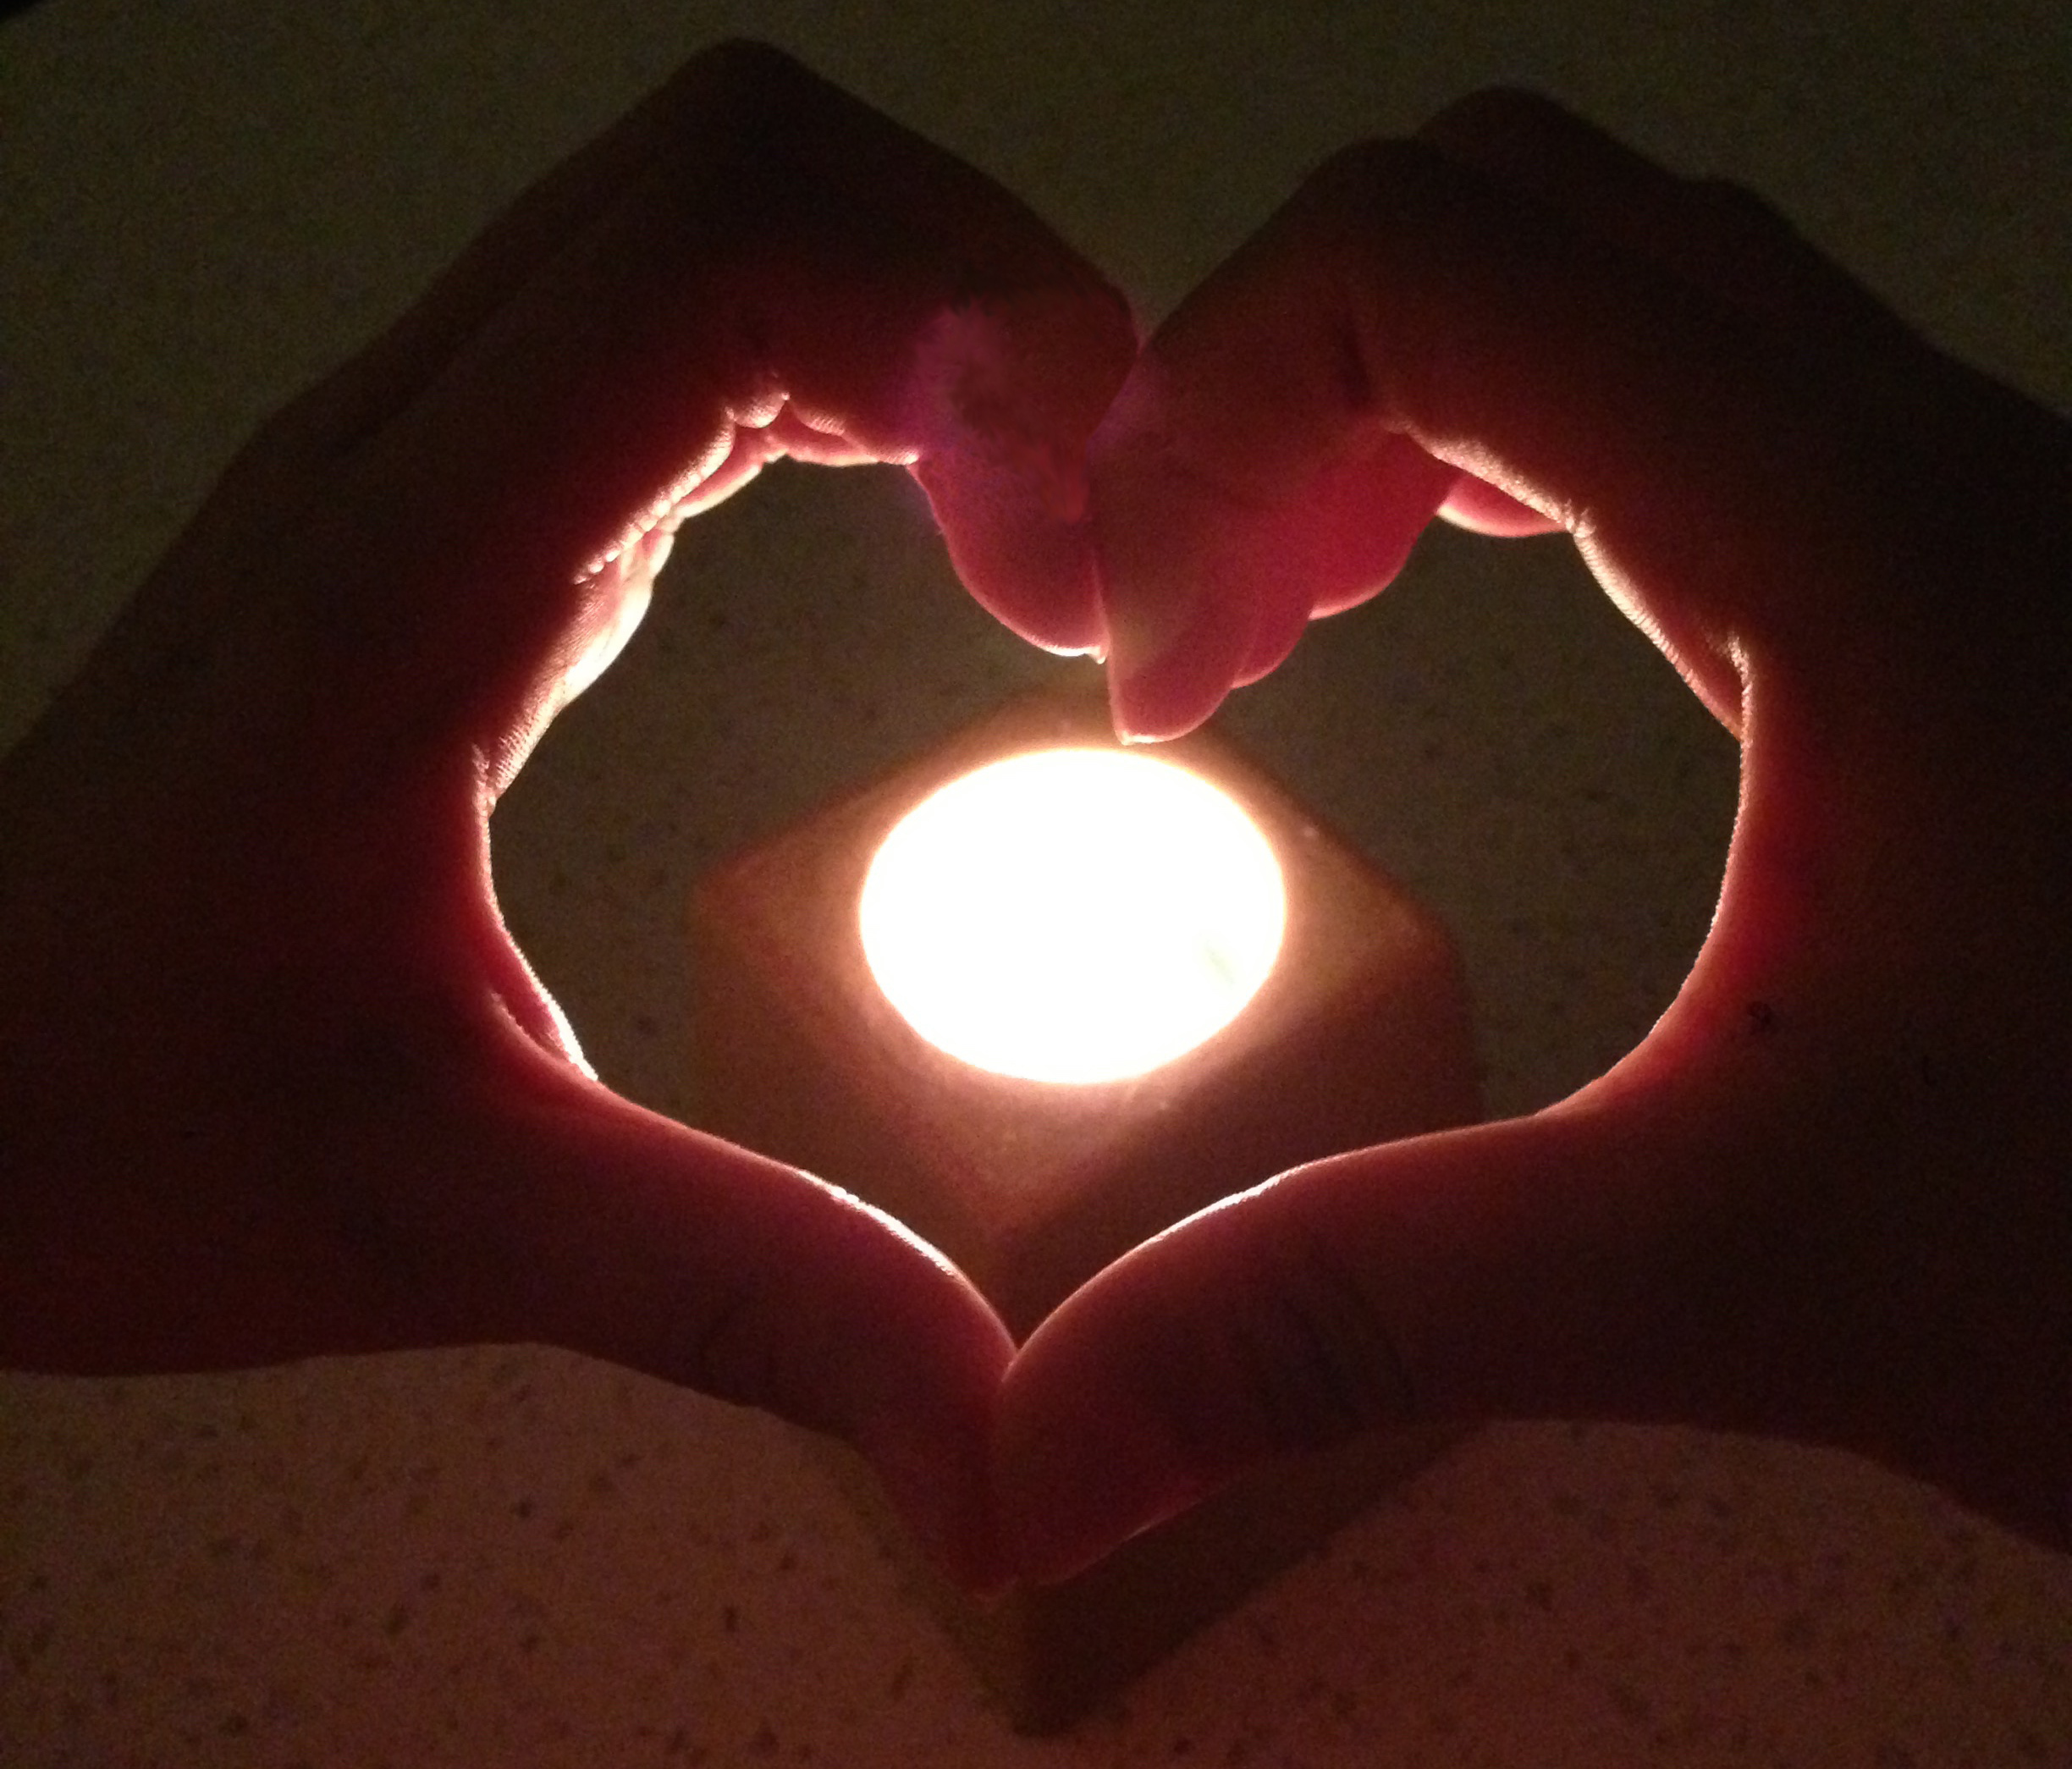 Candle with hands in shape of heart.